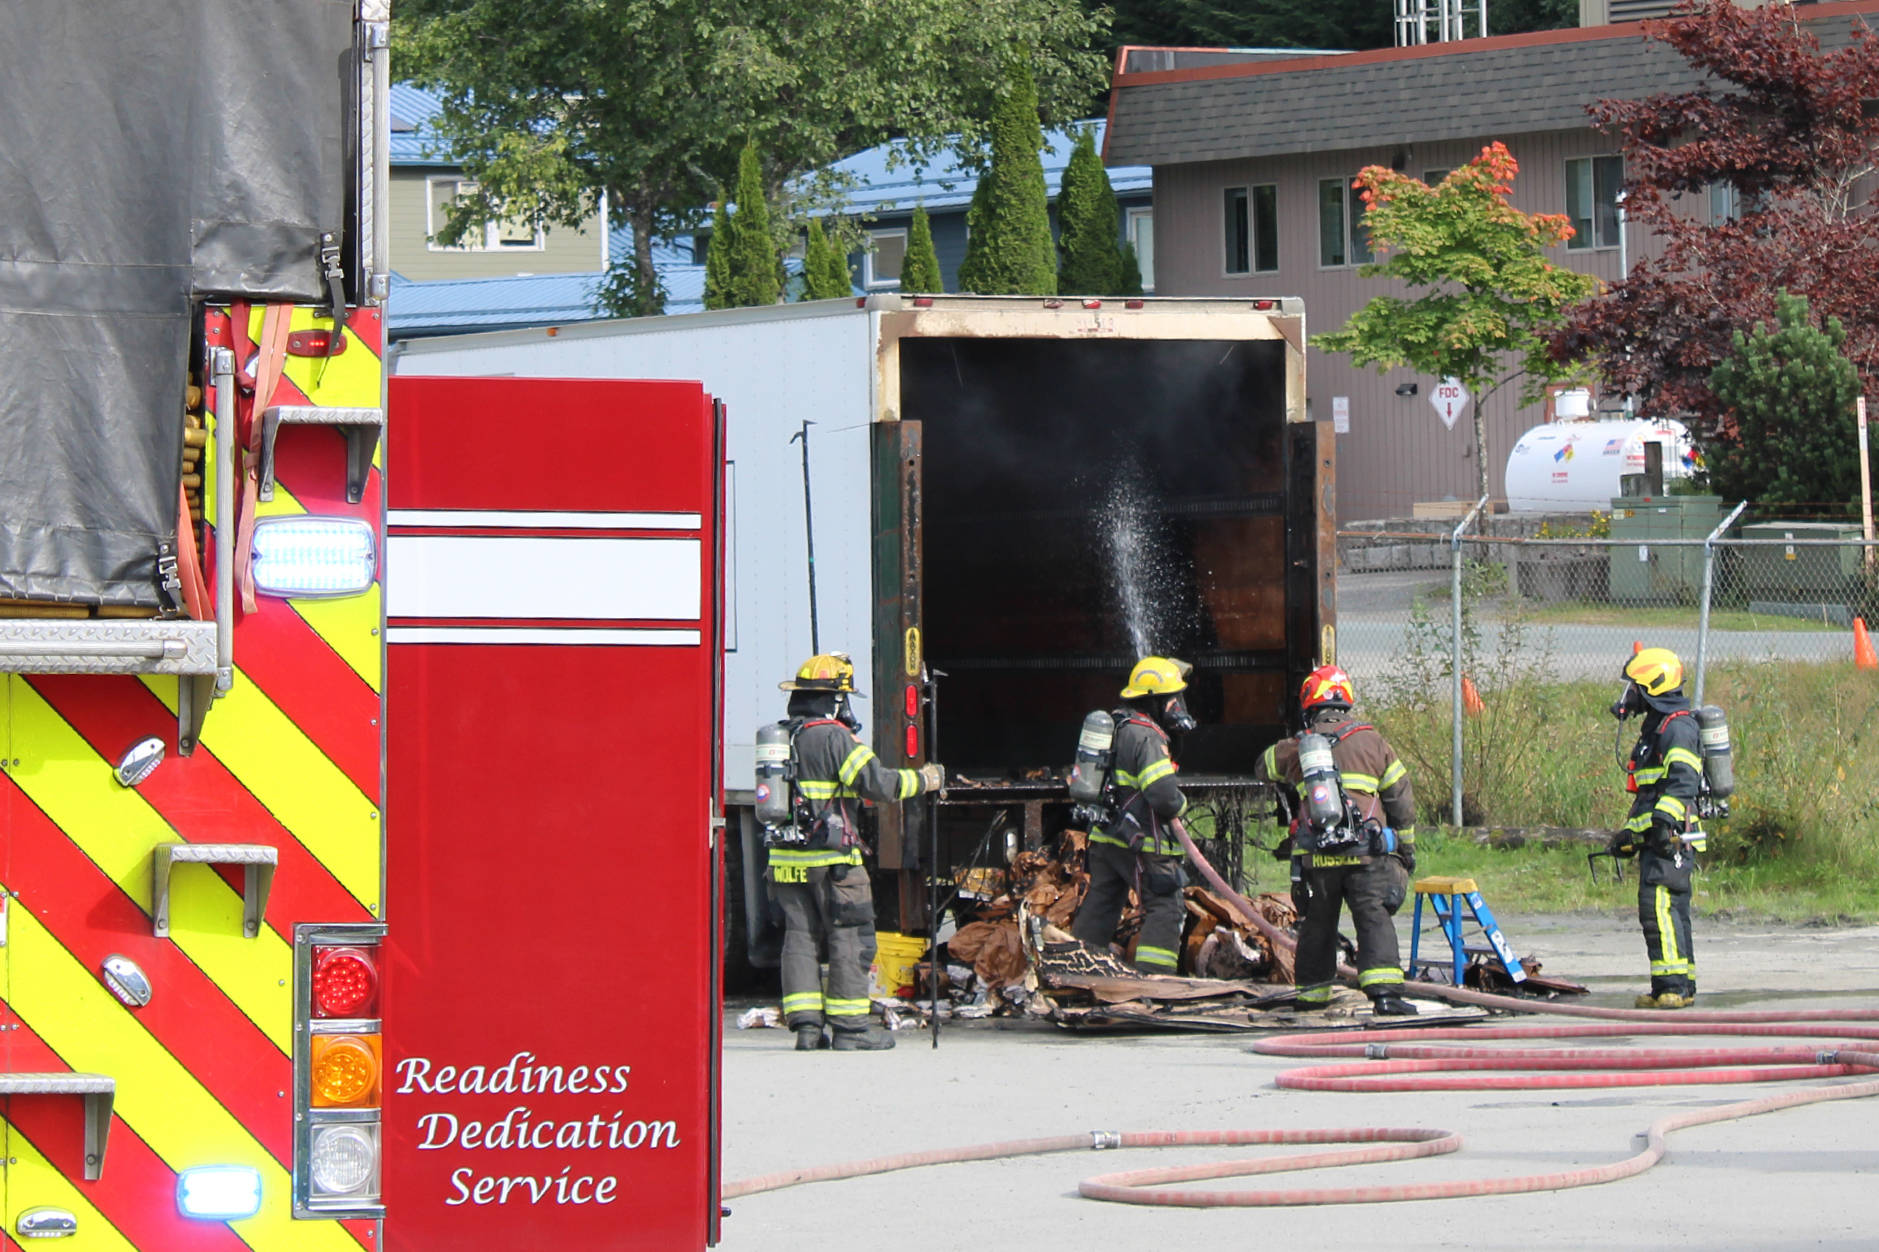 Firefighters spray the inside of a moving truck with water at the scene of a short vehicle fire on Sept. 17, 2020. (Ben Hohenstatt / Juneau Empire)